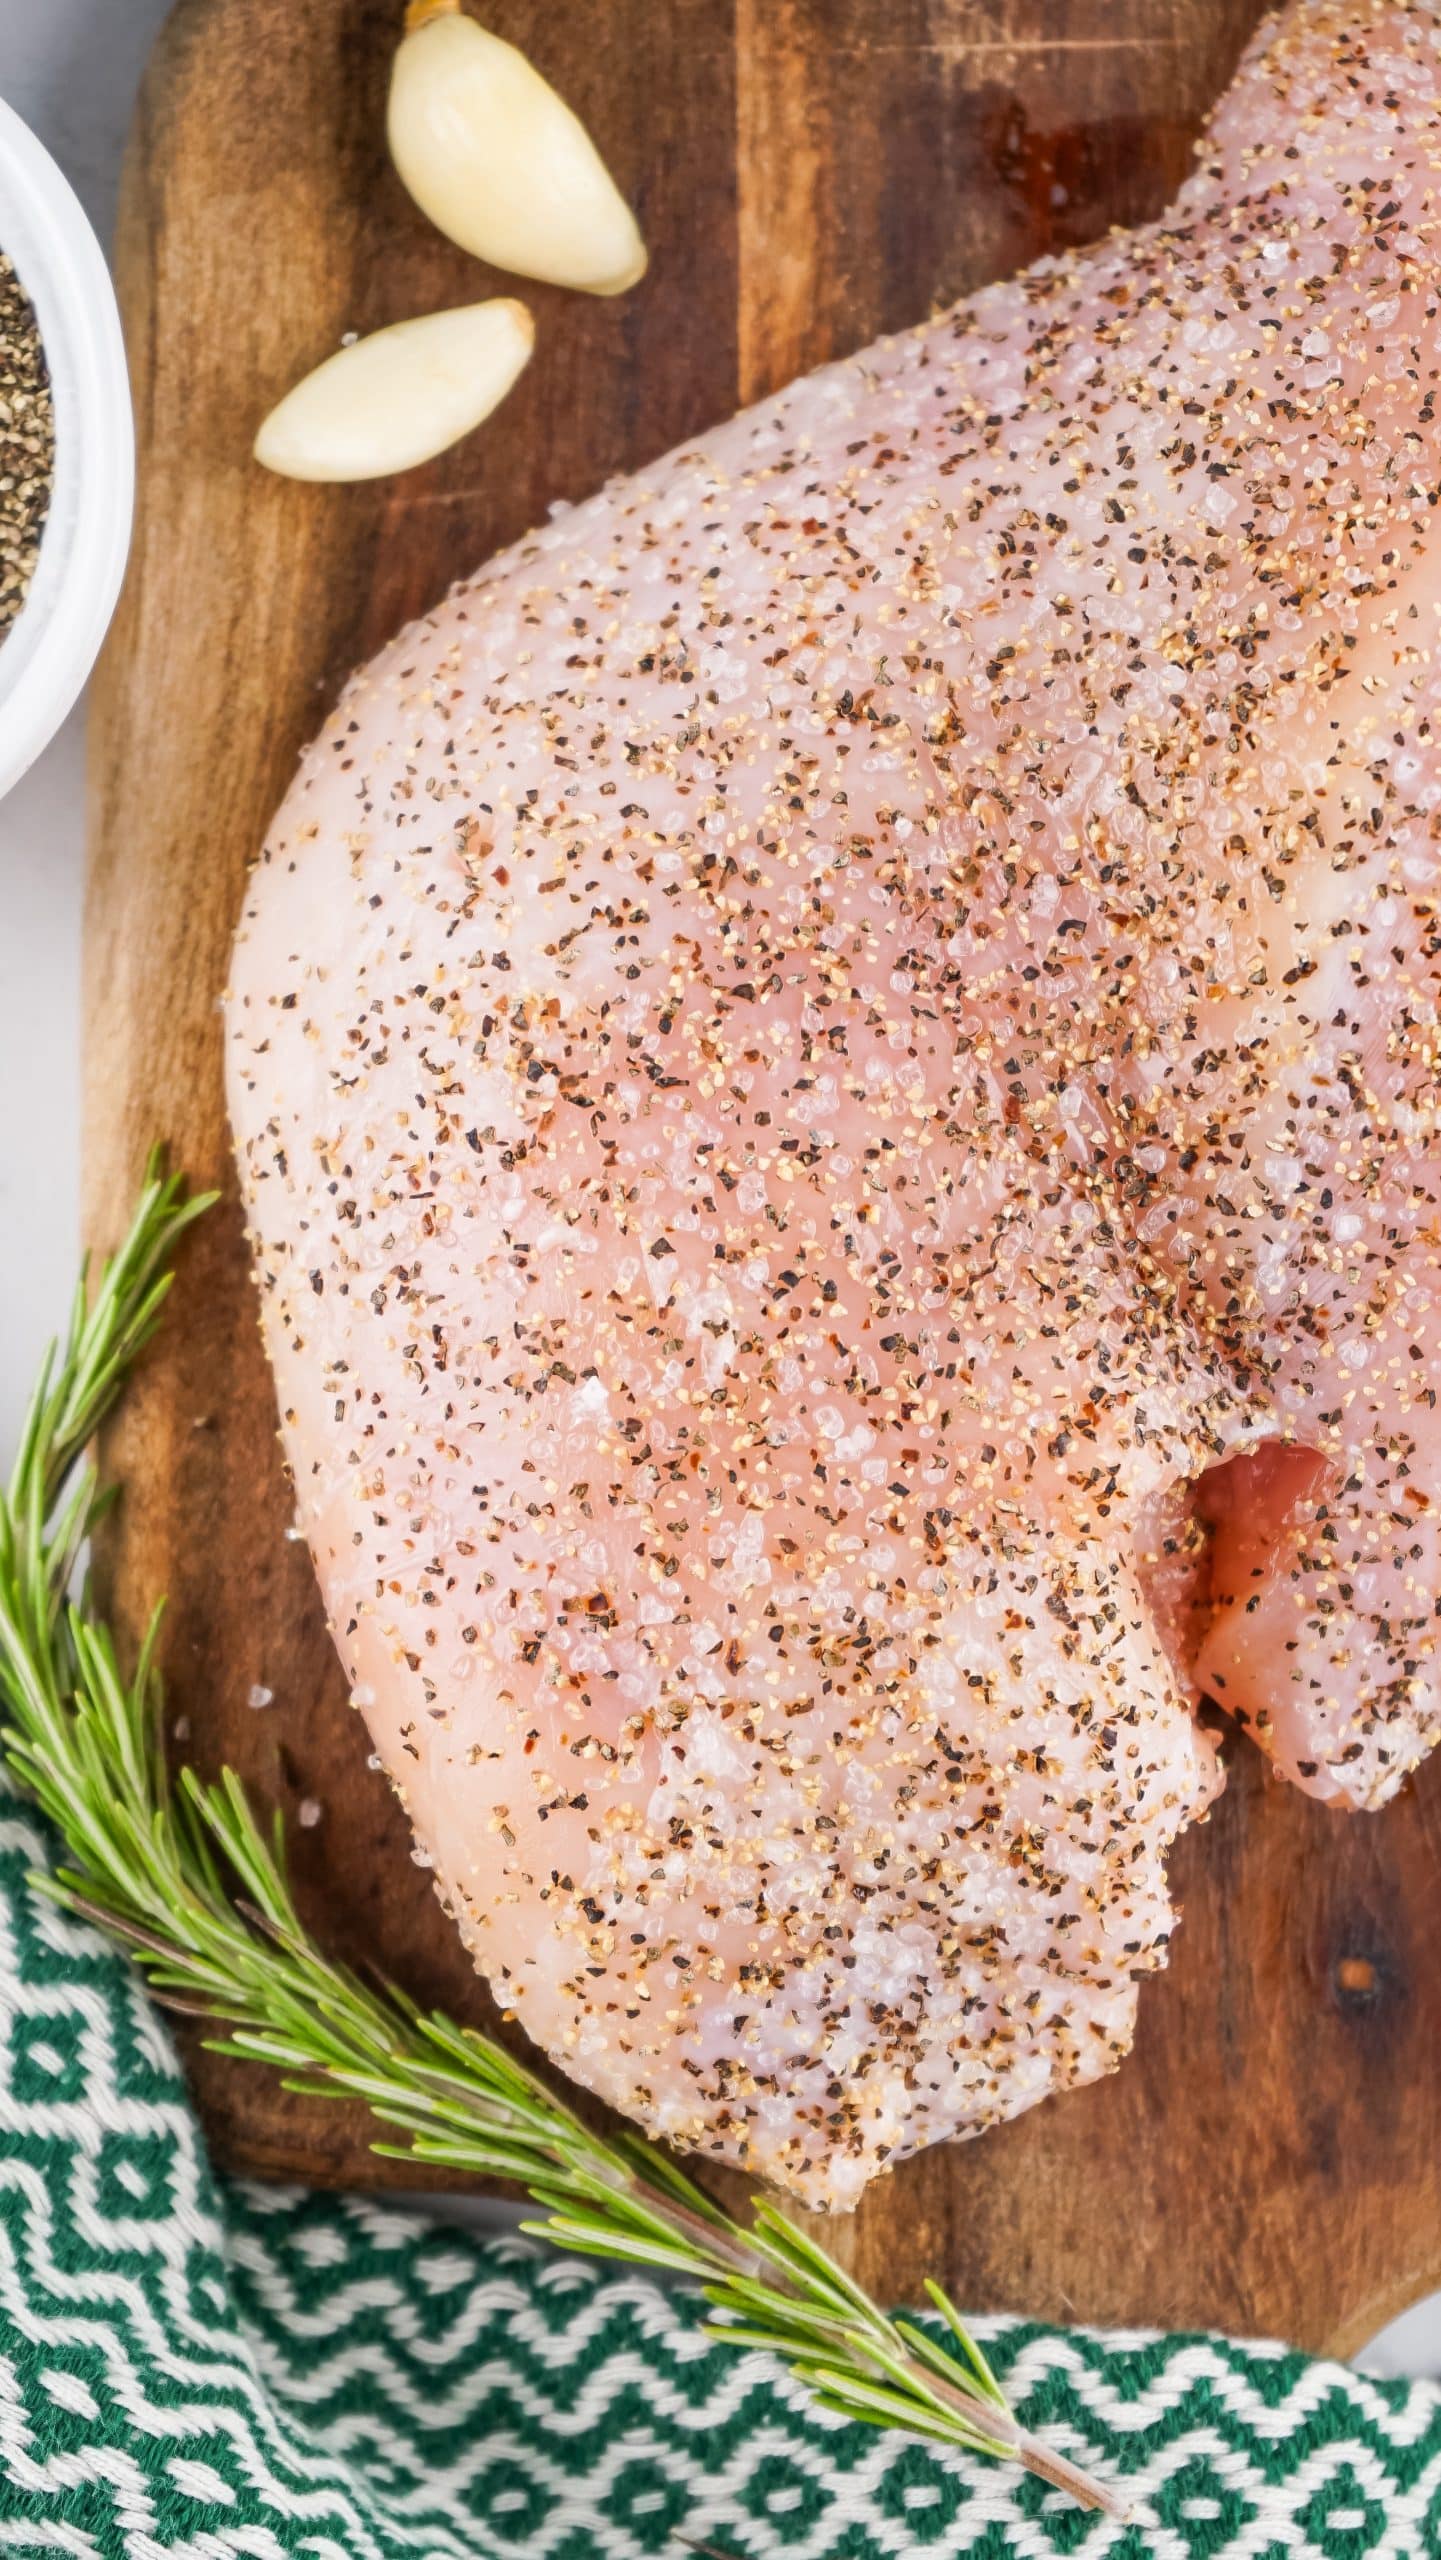 salt and pepper covered turkey breast on a wooden cutting board